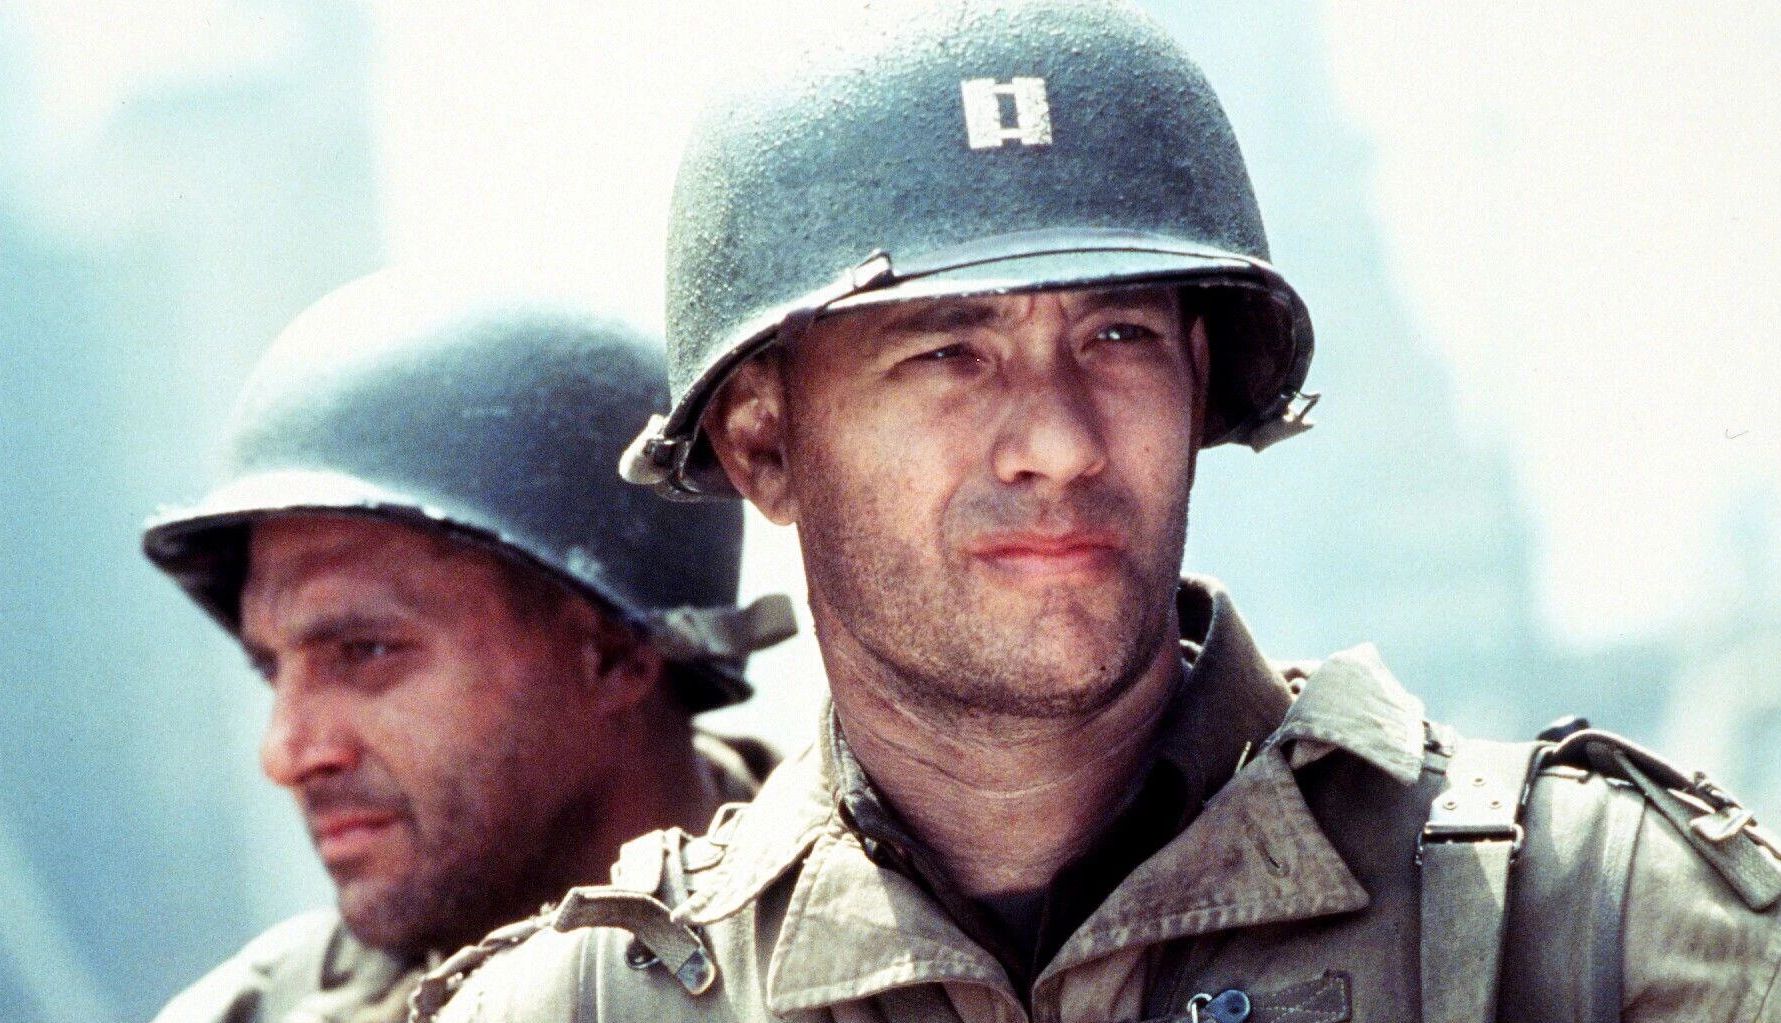 Tom Sizemore and Tom Hanks wearing military gear in the film Saving Private Ryan